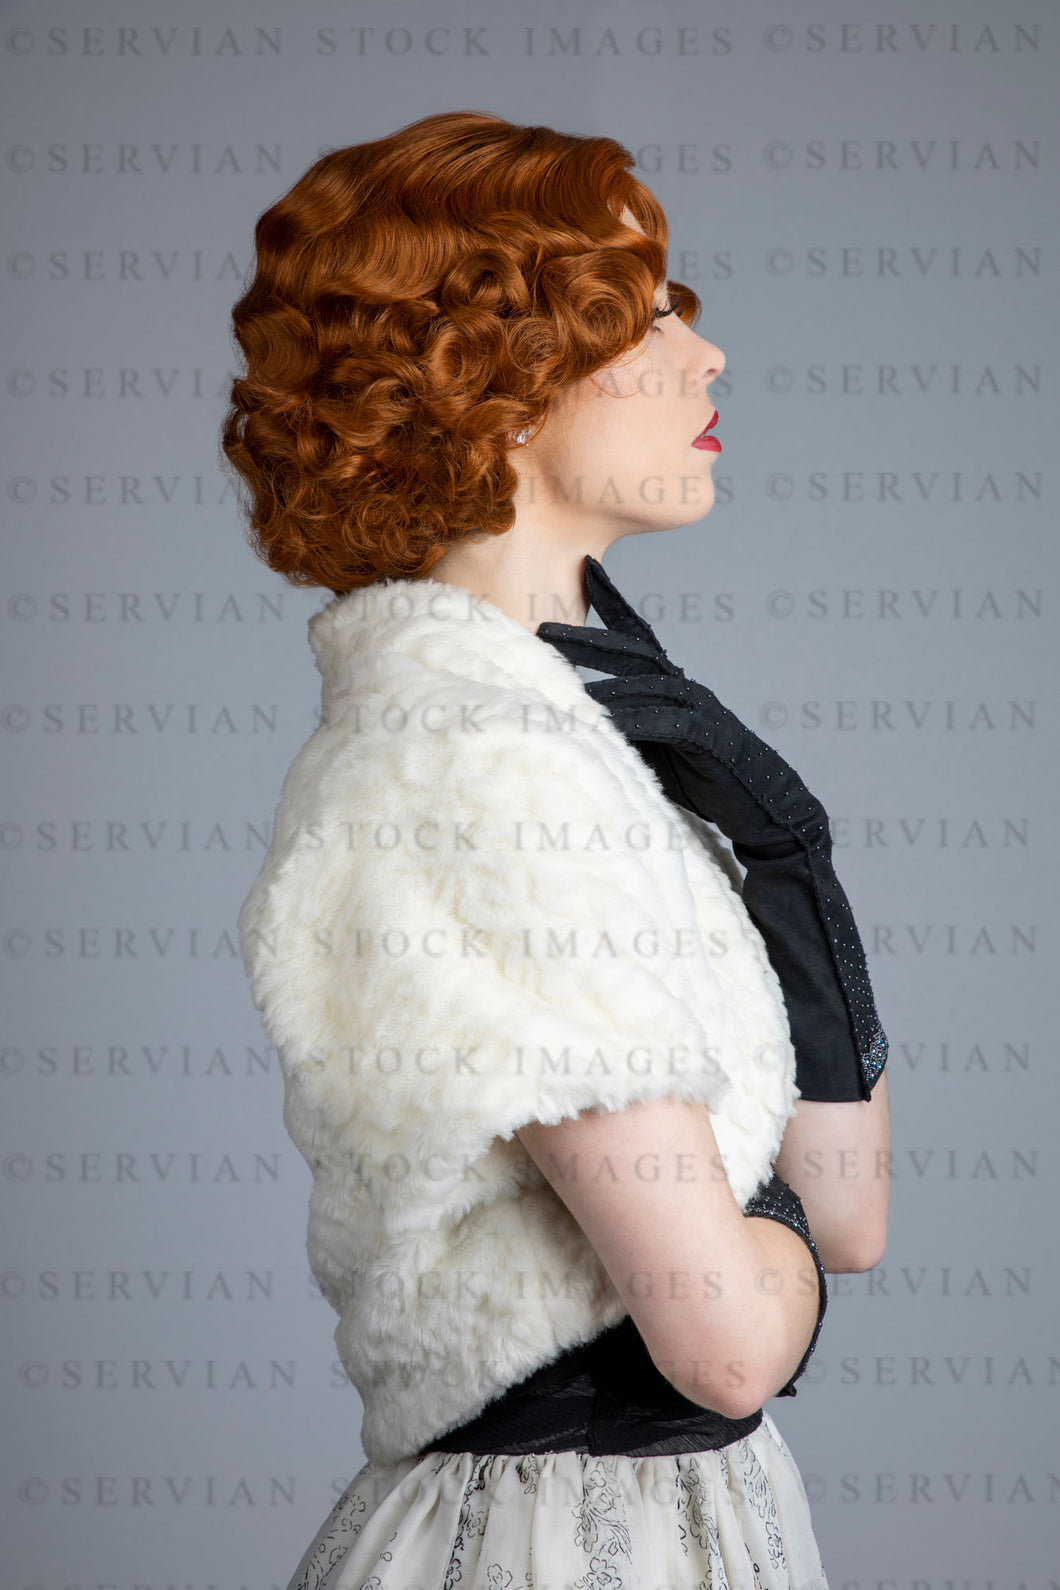 1950s woman in vintage dress, white fur shrug, and black gloves (Lacey 2531)